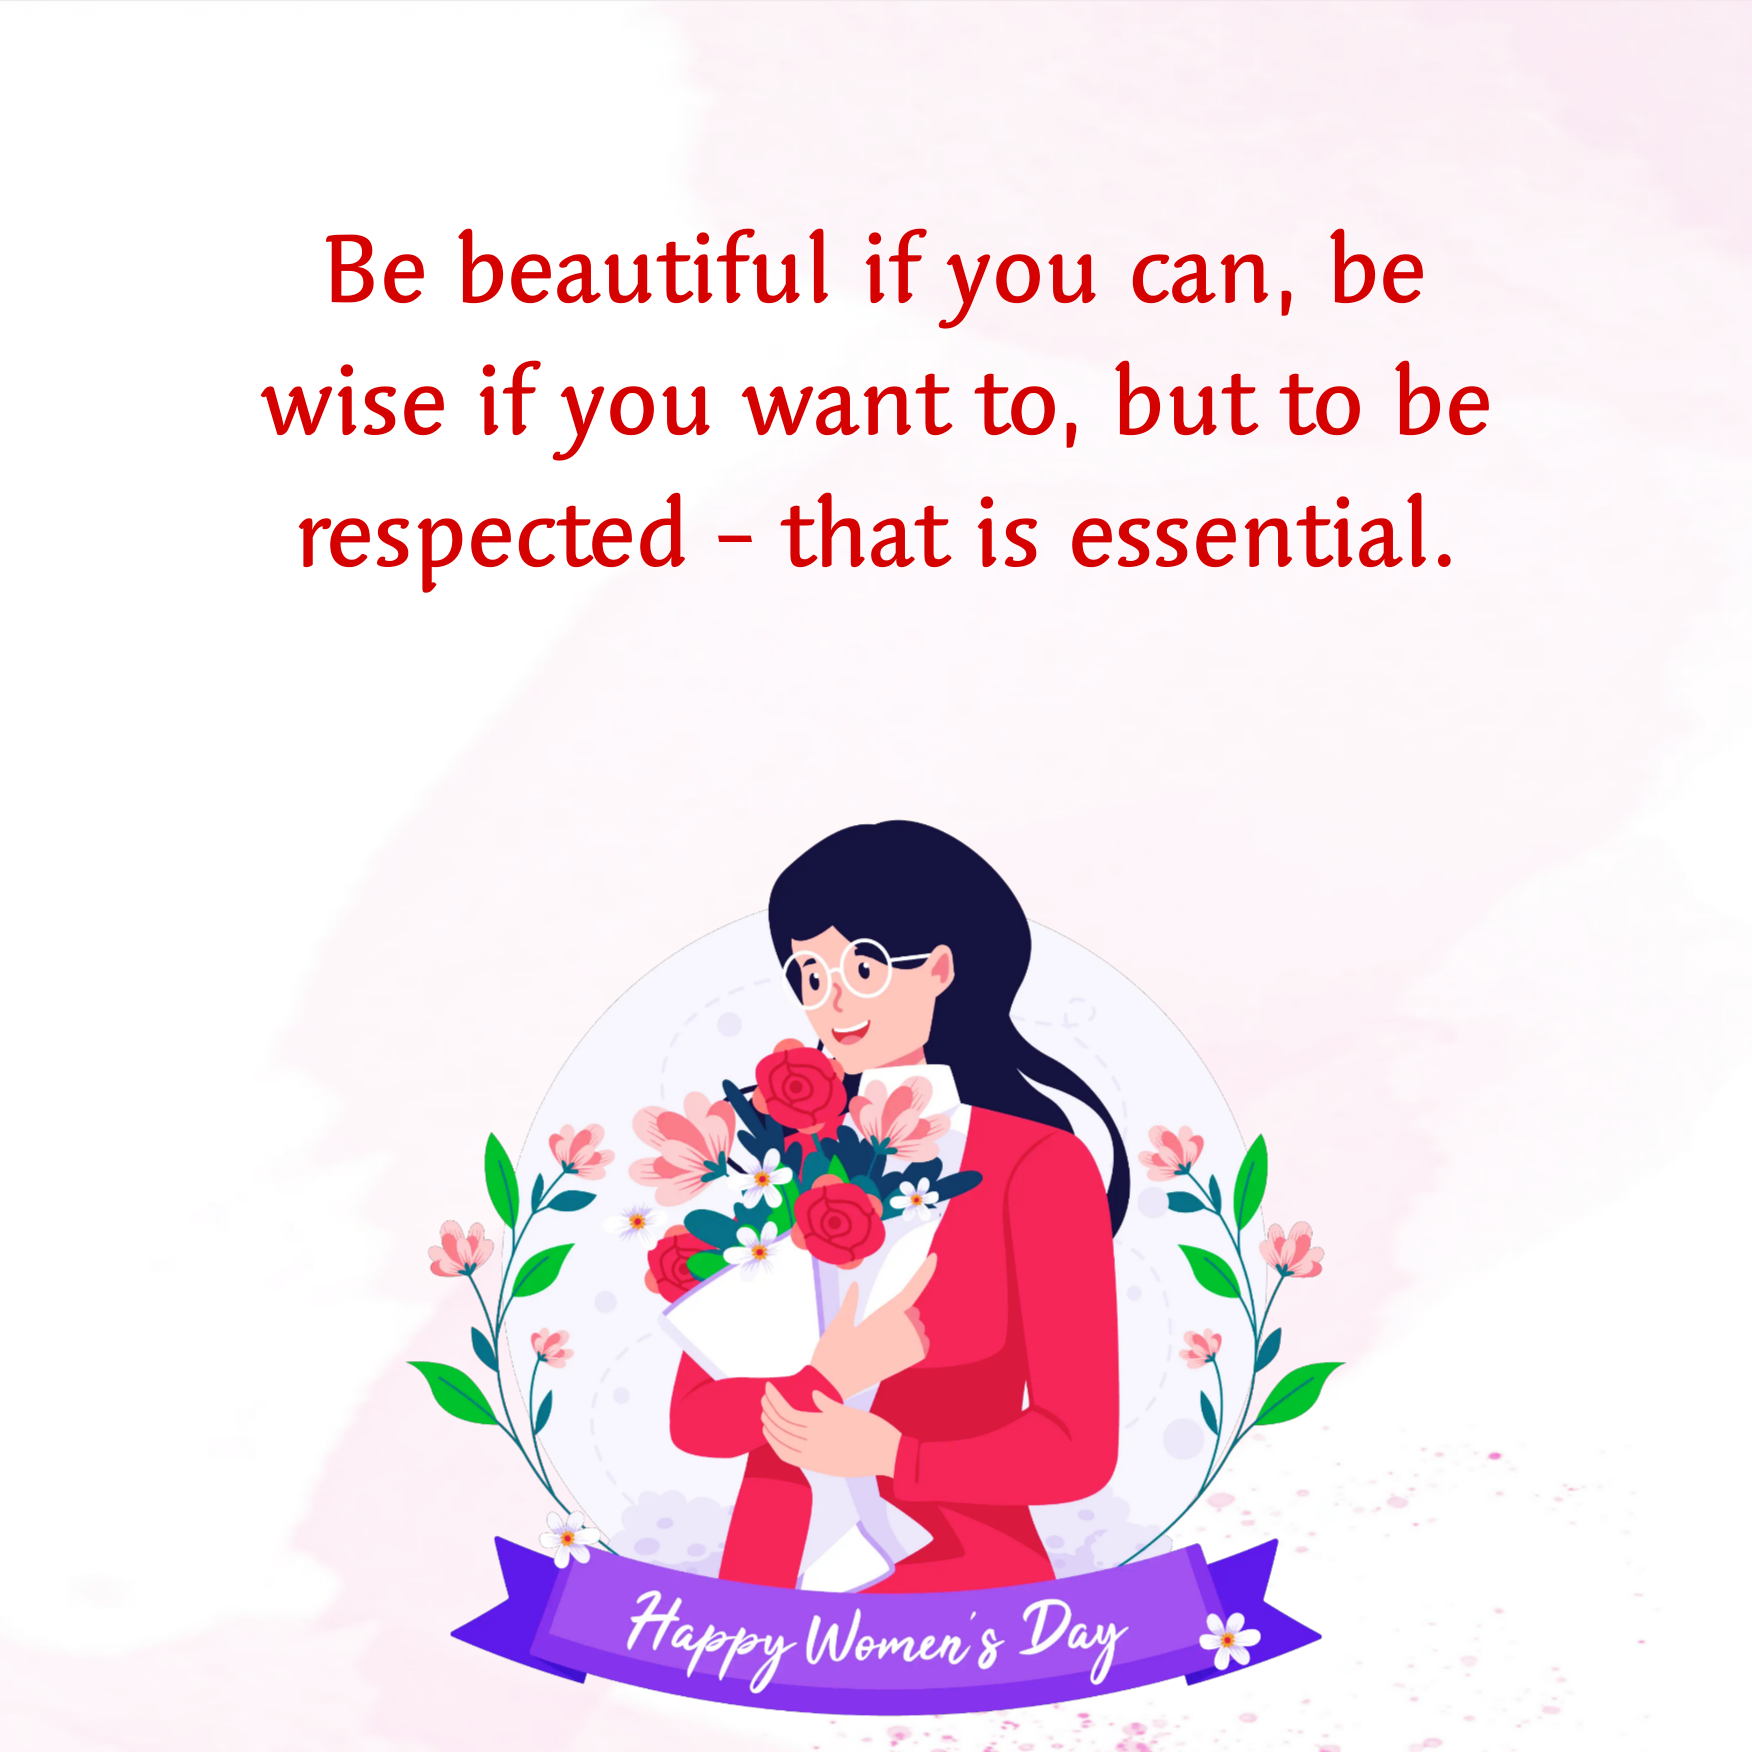 Be beautiful if you can be wise if you want to